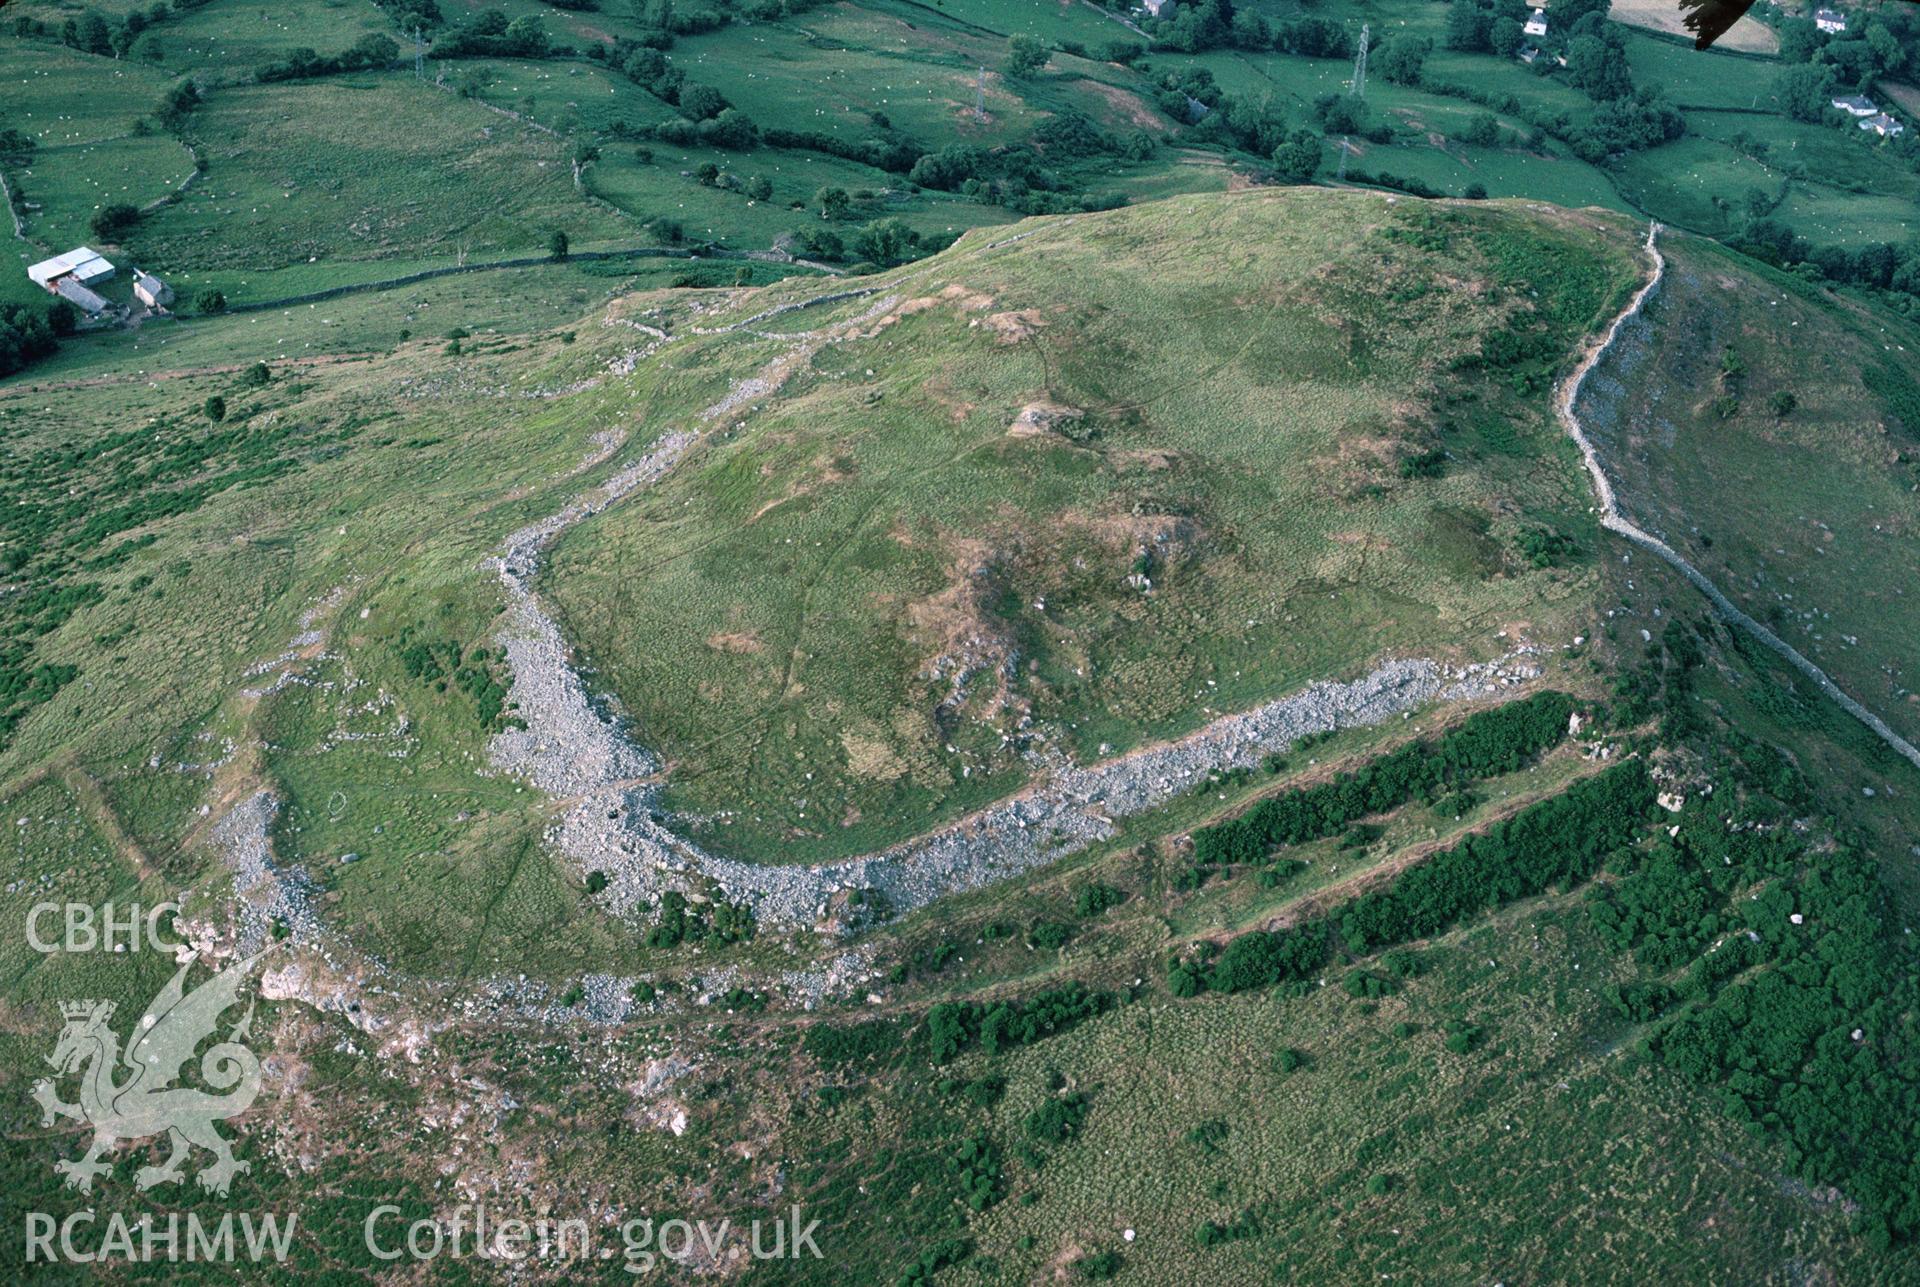 Slide of RCAHMW colour oblique aerial photograph of Pen Y Gaer Camp, taken by C.R. Musson, 27/7/1996.